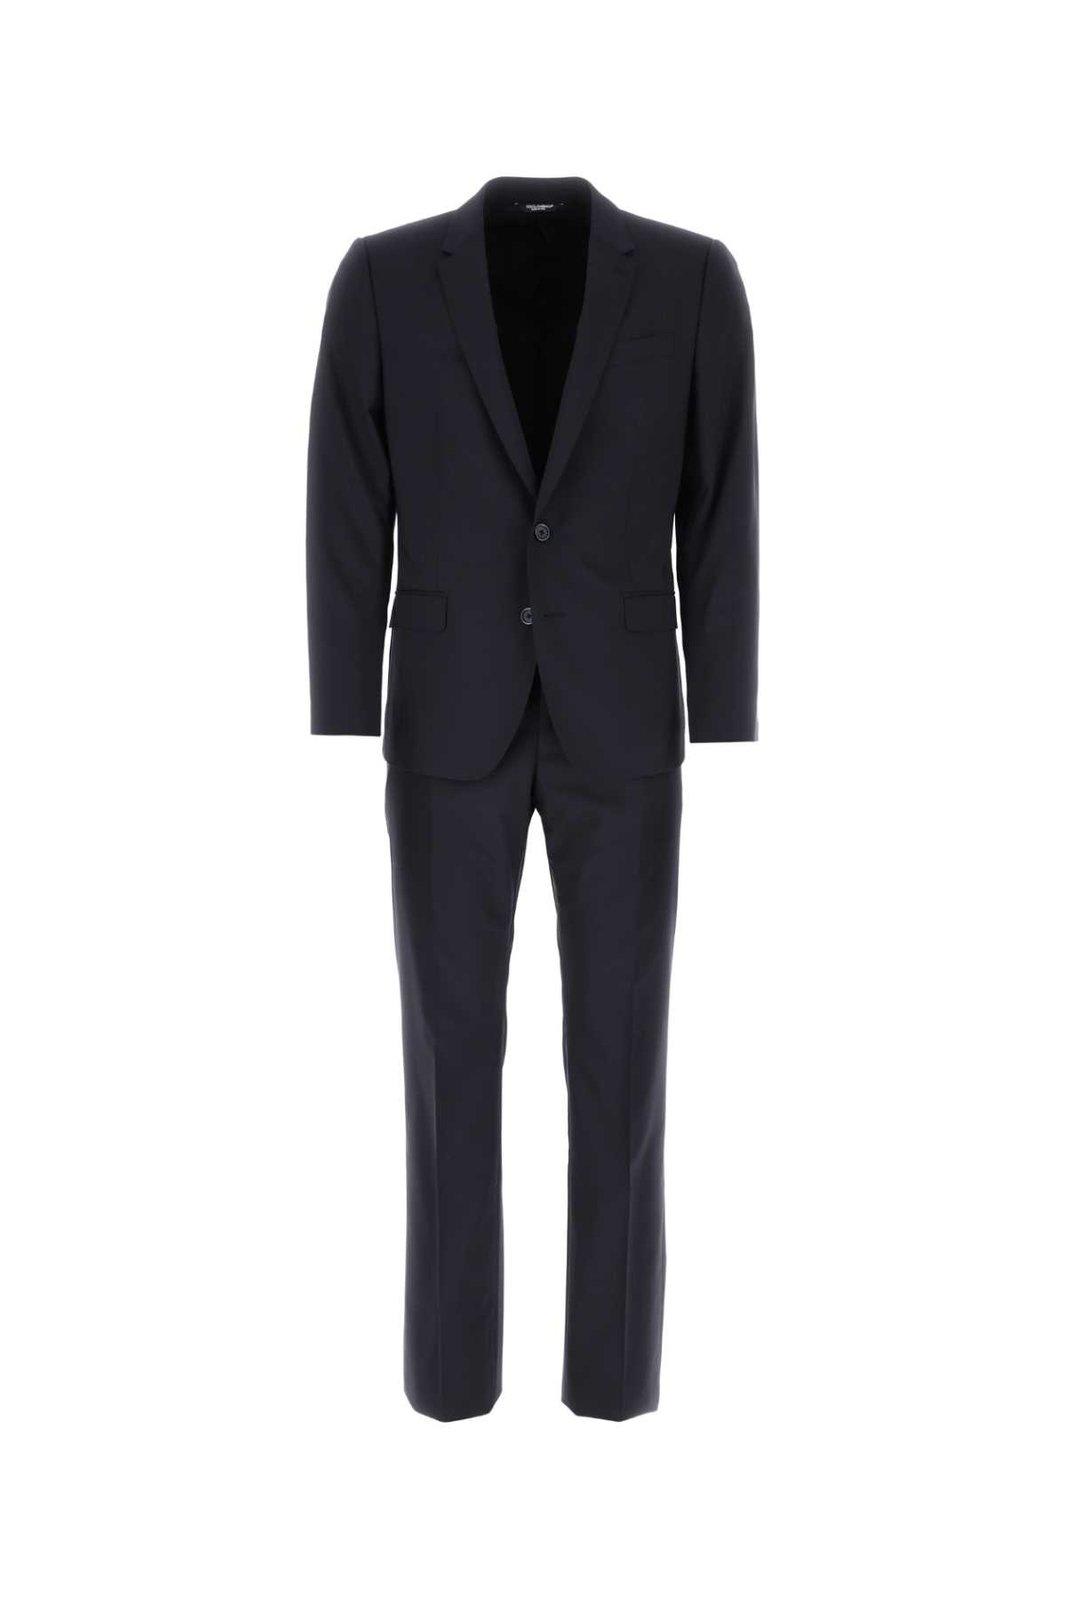 DOLCE & GABBANA SINGLE BREASTED TAILORED SUIT